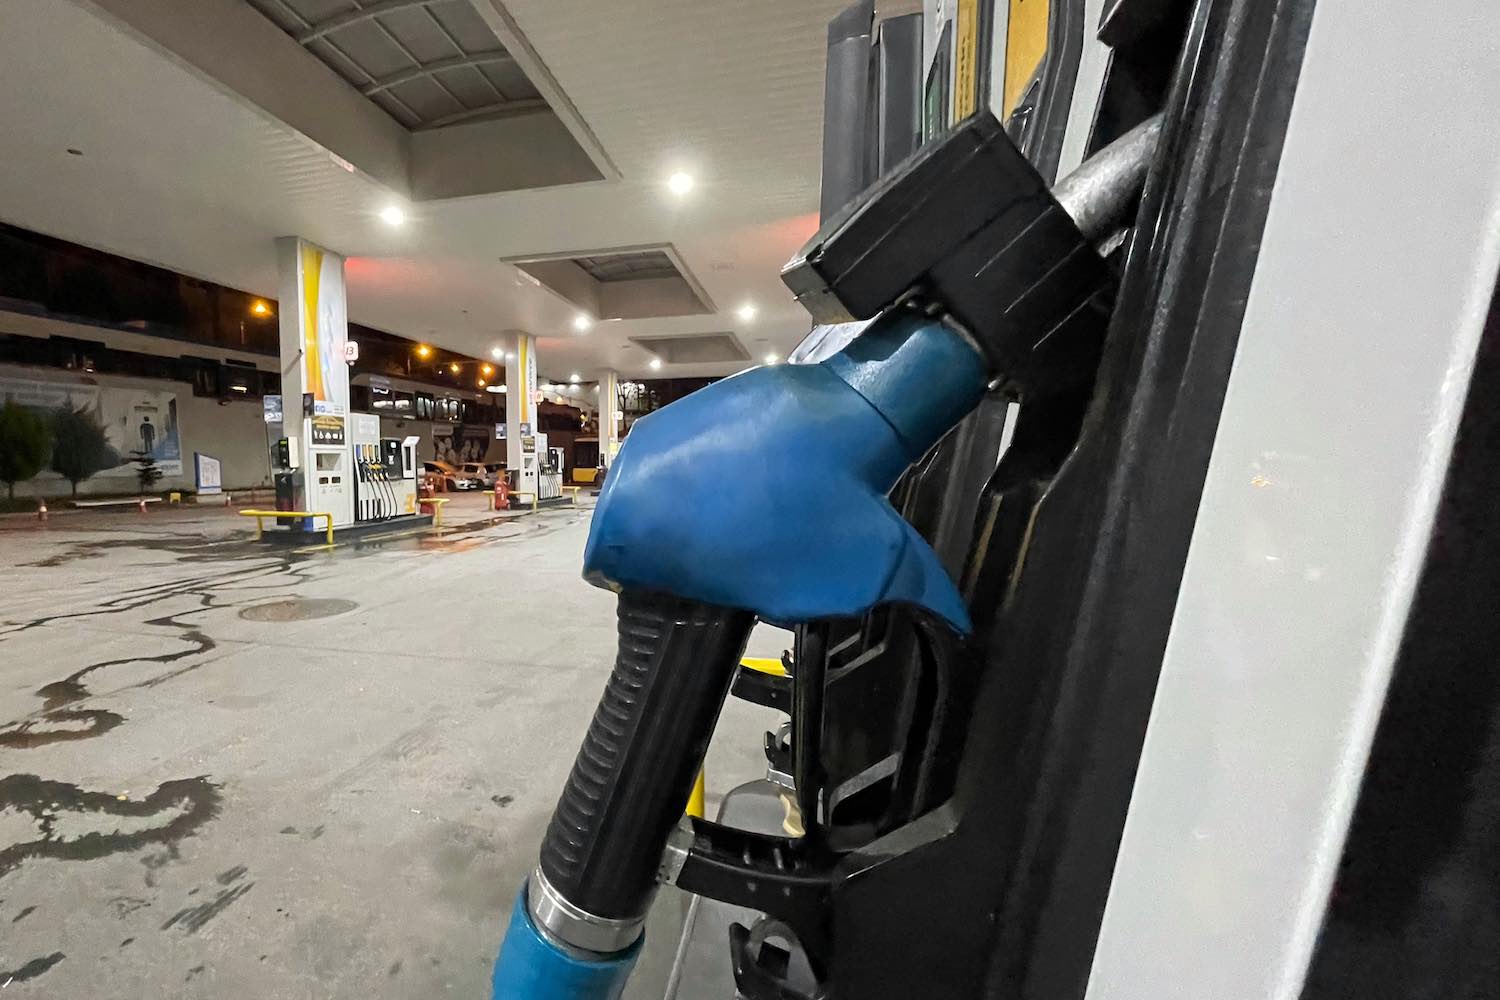 Car News | AA: Clarity needed on fuel prices